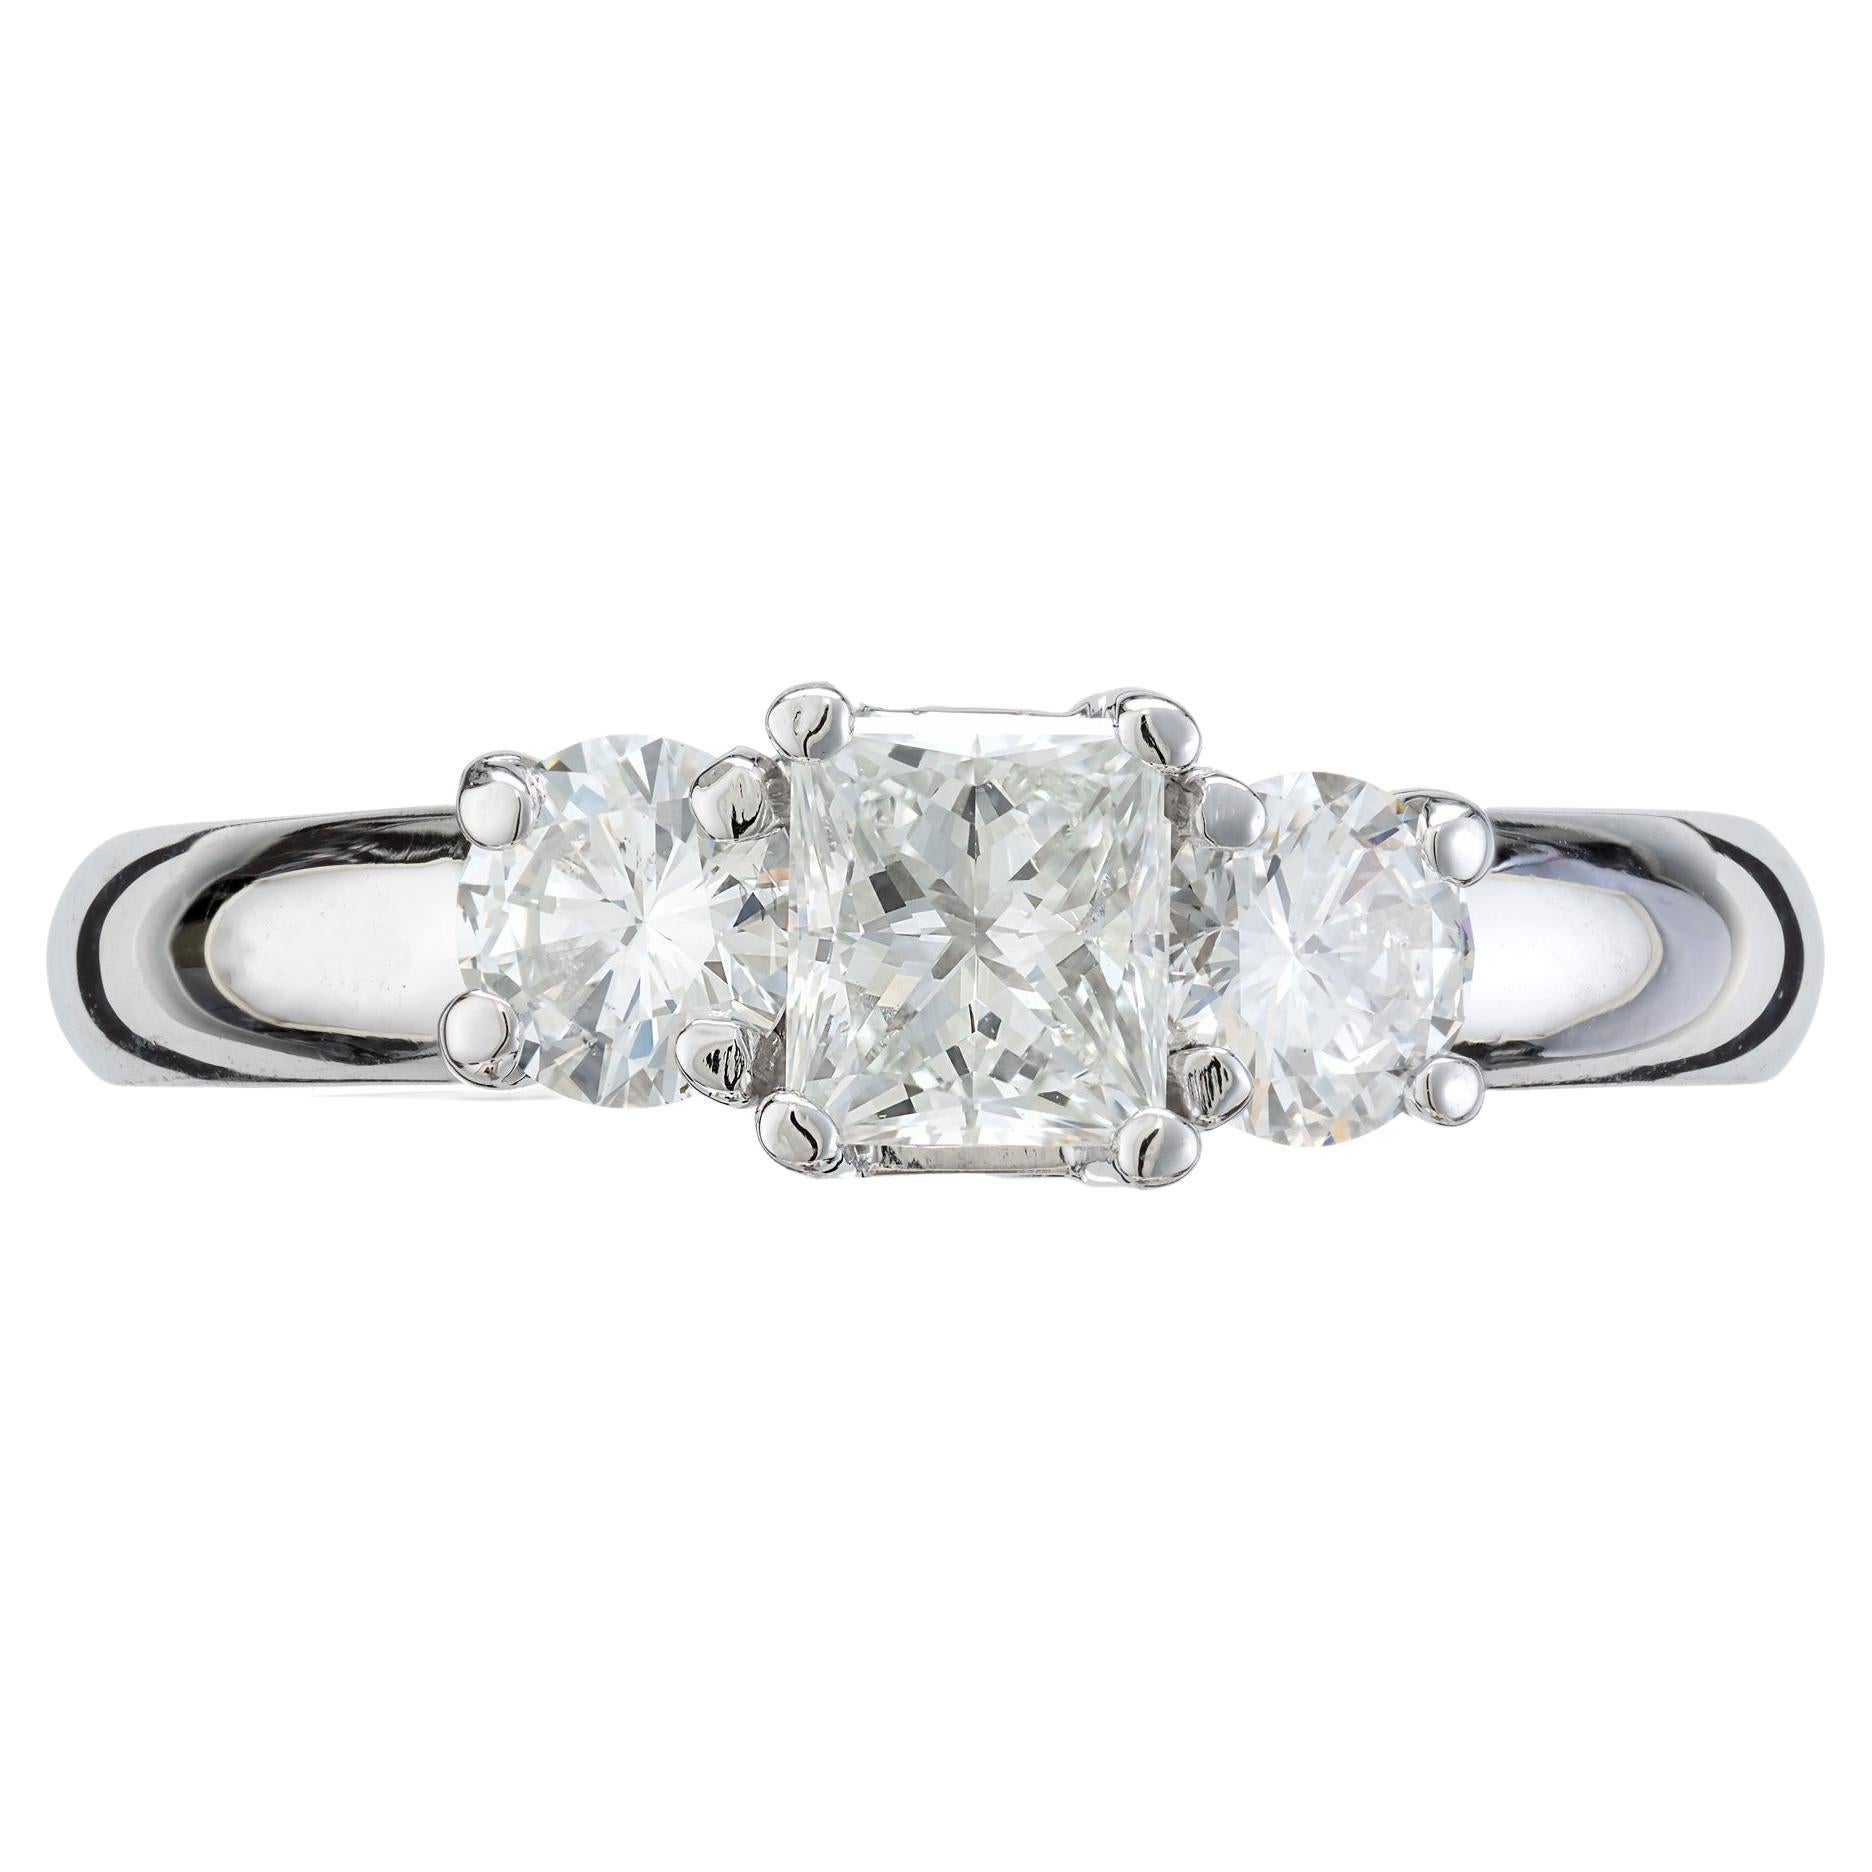 Classic neat clean low set three stone diamond engagement ring. EGL certified .48ct princess cut diamond center stone set in a simple three-stone platinum setting with two round side diamonds. This princess cut diamond is certified by the EGL as